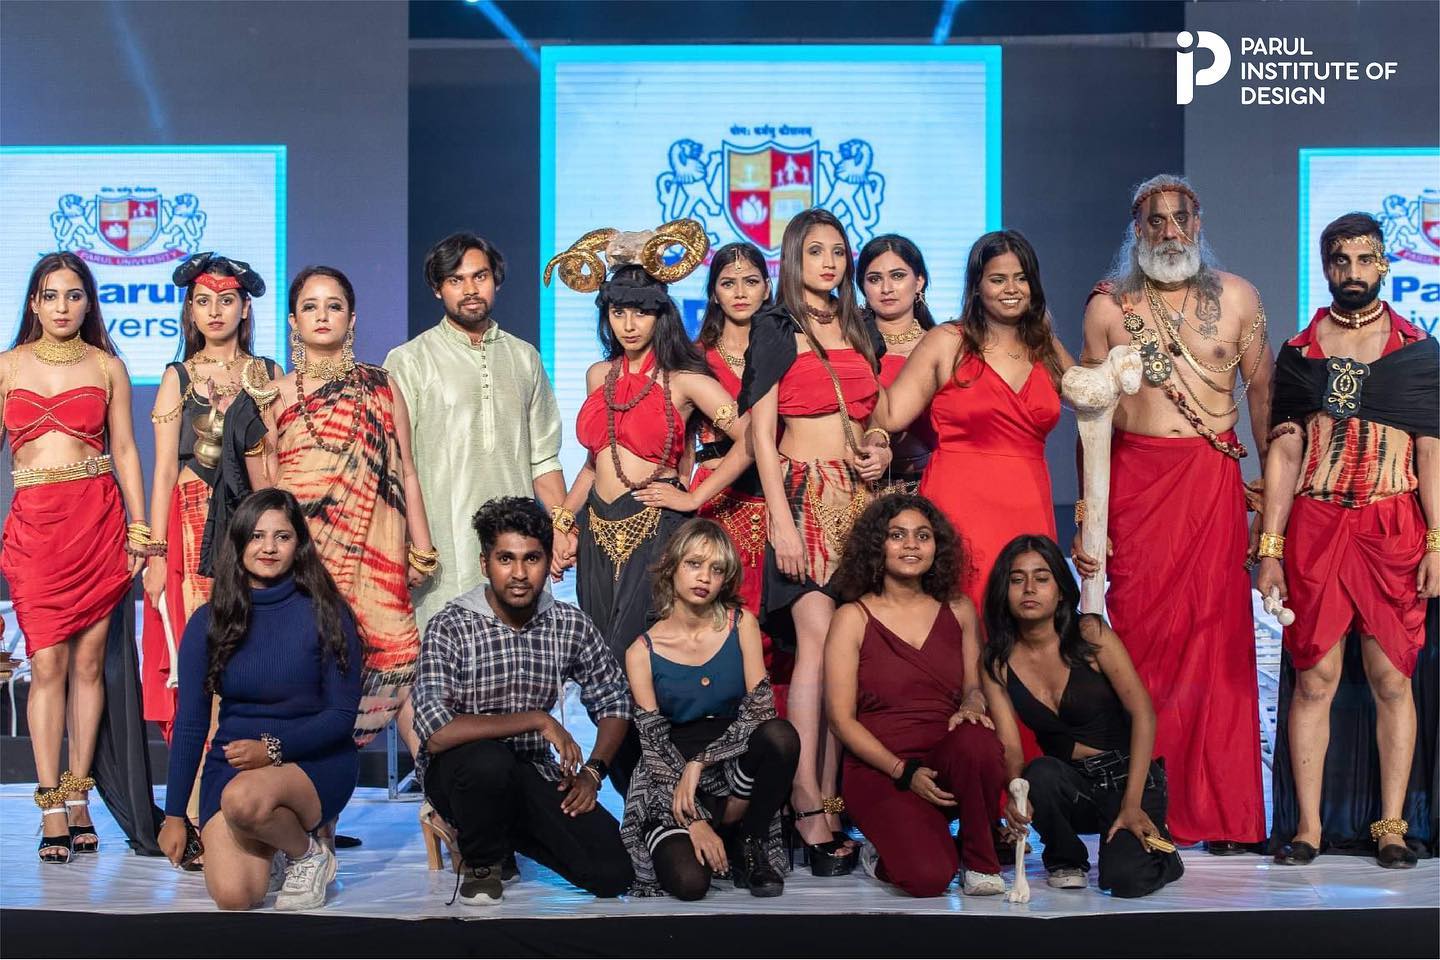 A team of 4 design students give immense pride to the university by bagging accolades at the International Fashion Show week in Nepal